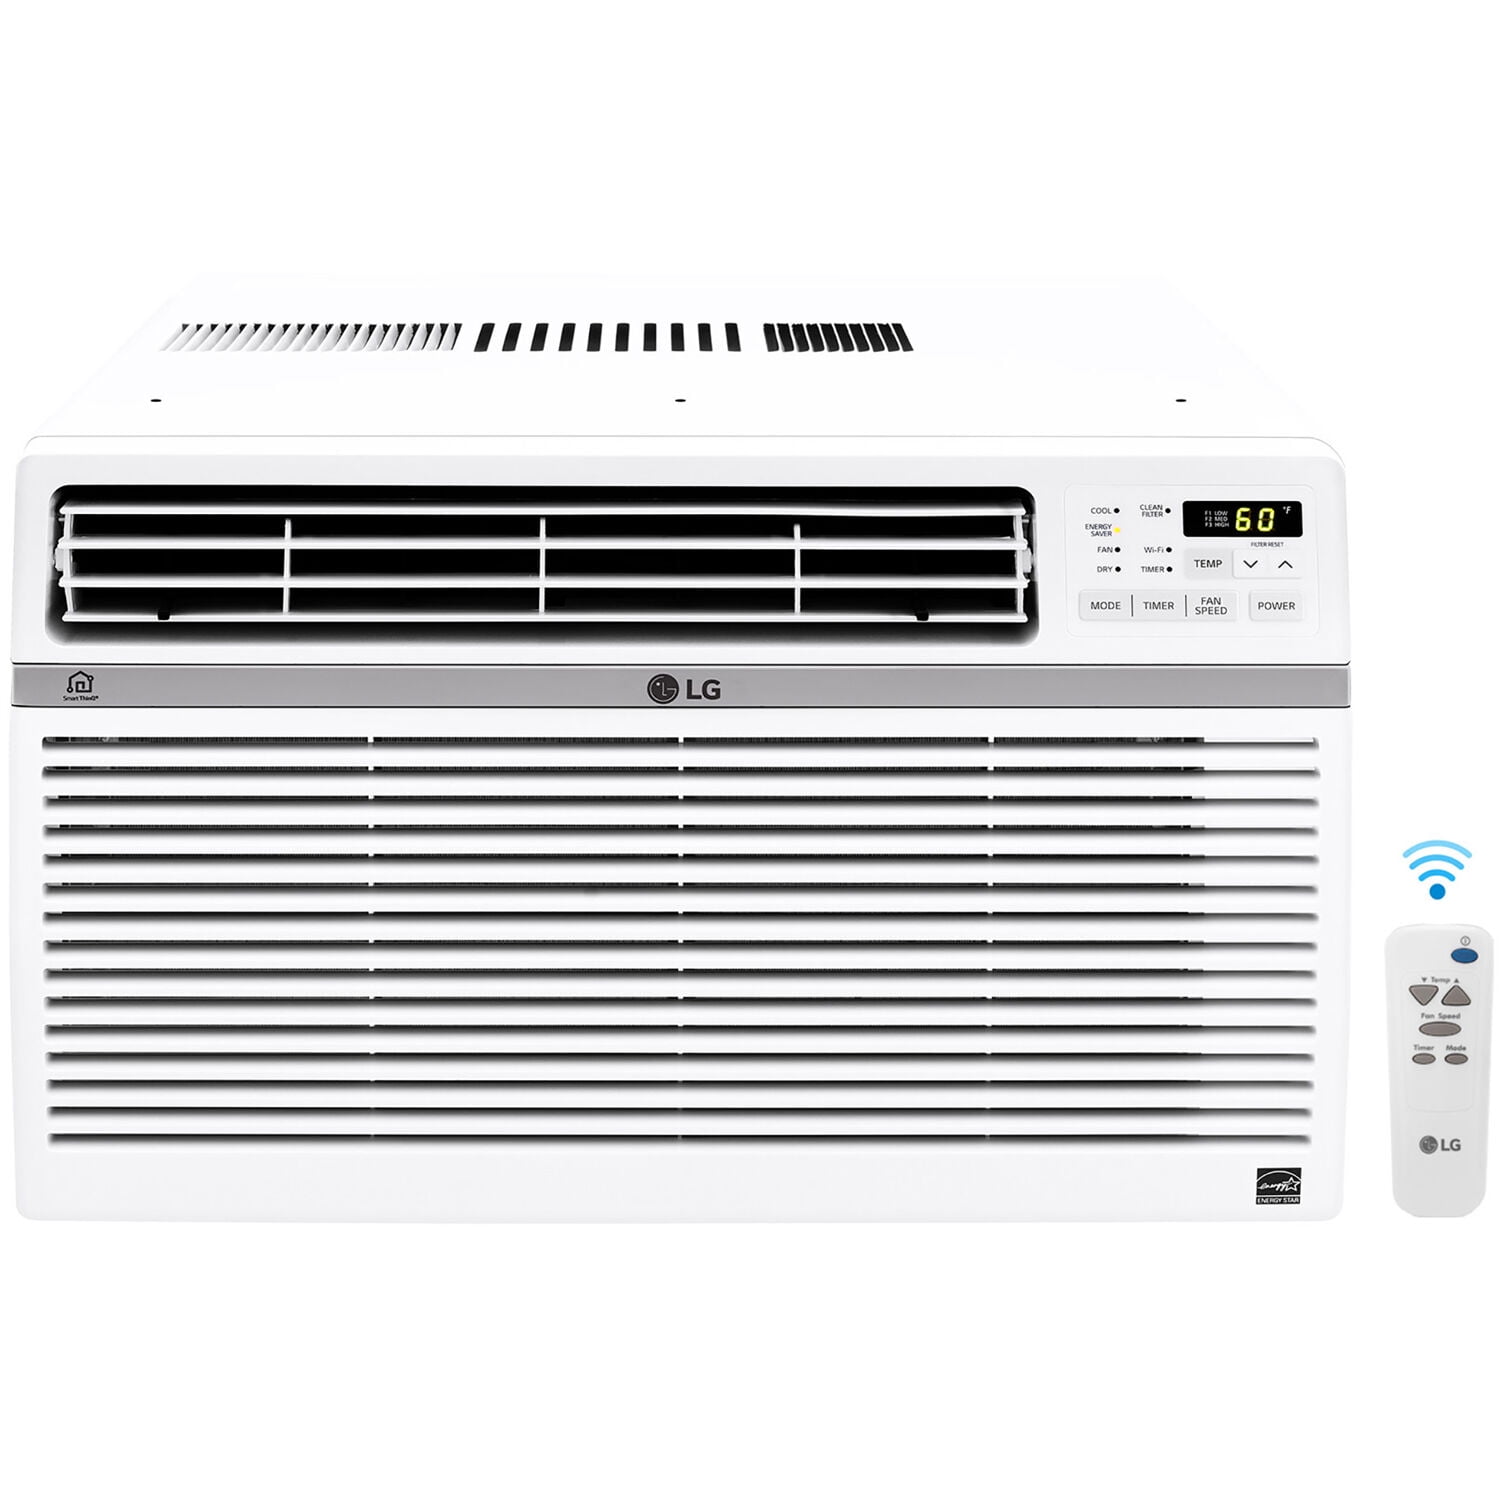 LG BTU Smart Window Air Conditioner, Cools up to 450 Sq. Ft., Smartphone and Voice Control works with LG ThinQ, Amazon Alexa and Hey Google, ENERGY STAR®, 3 Cool & Fan